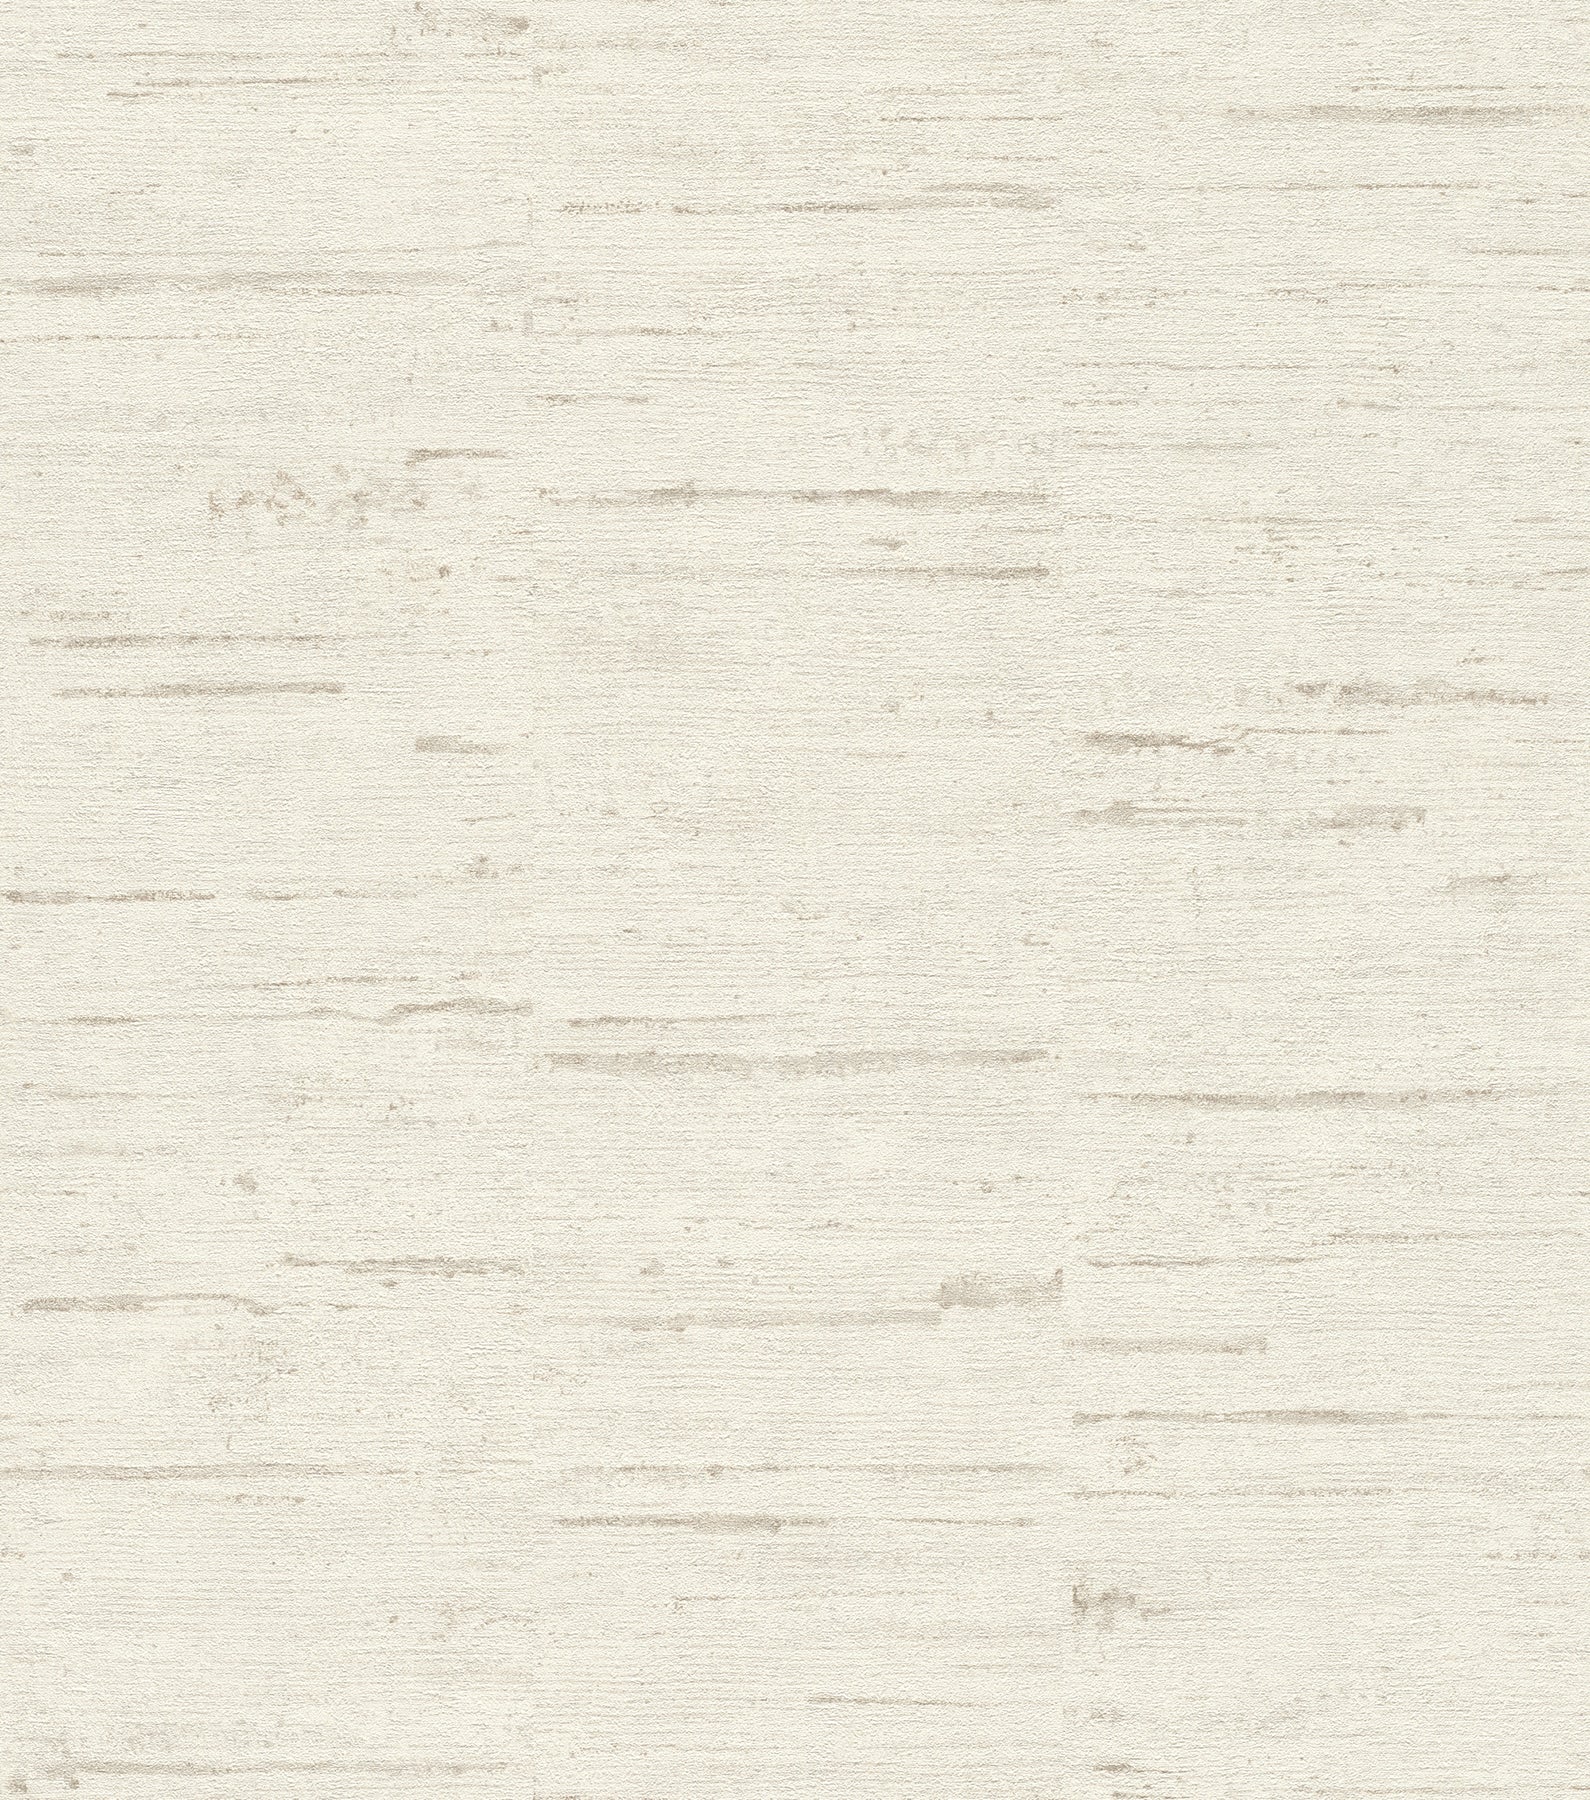 Buy 4015-426700 Beyond Textures Maclure Dove Striated Texture Dove by Advantage